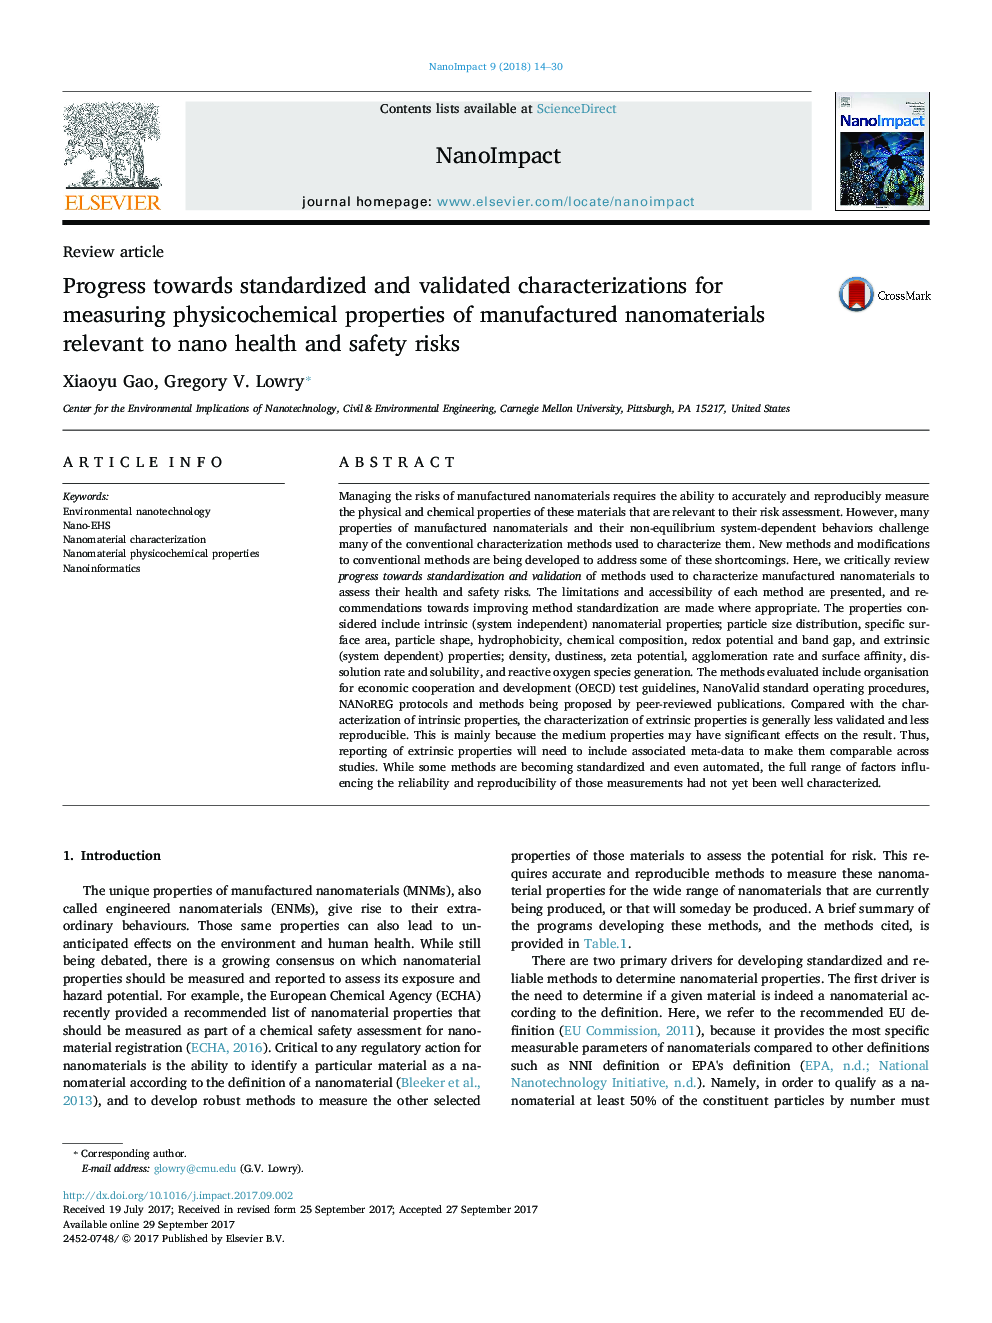 Progress towards standardized and validated characterizations for measuring physicochemical properties of manufactured nanomaterials relevant to nano health and safety risks